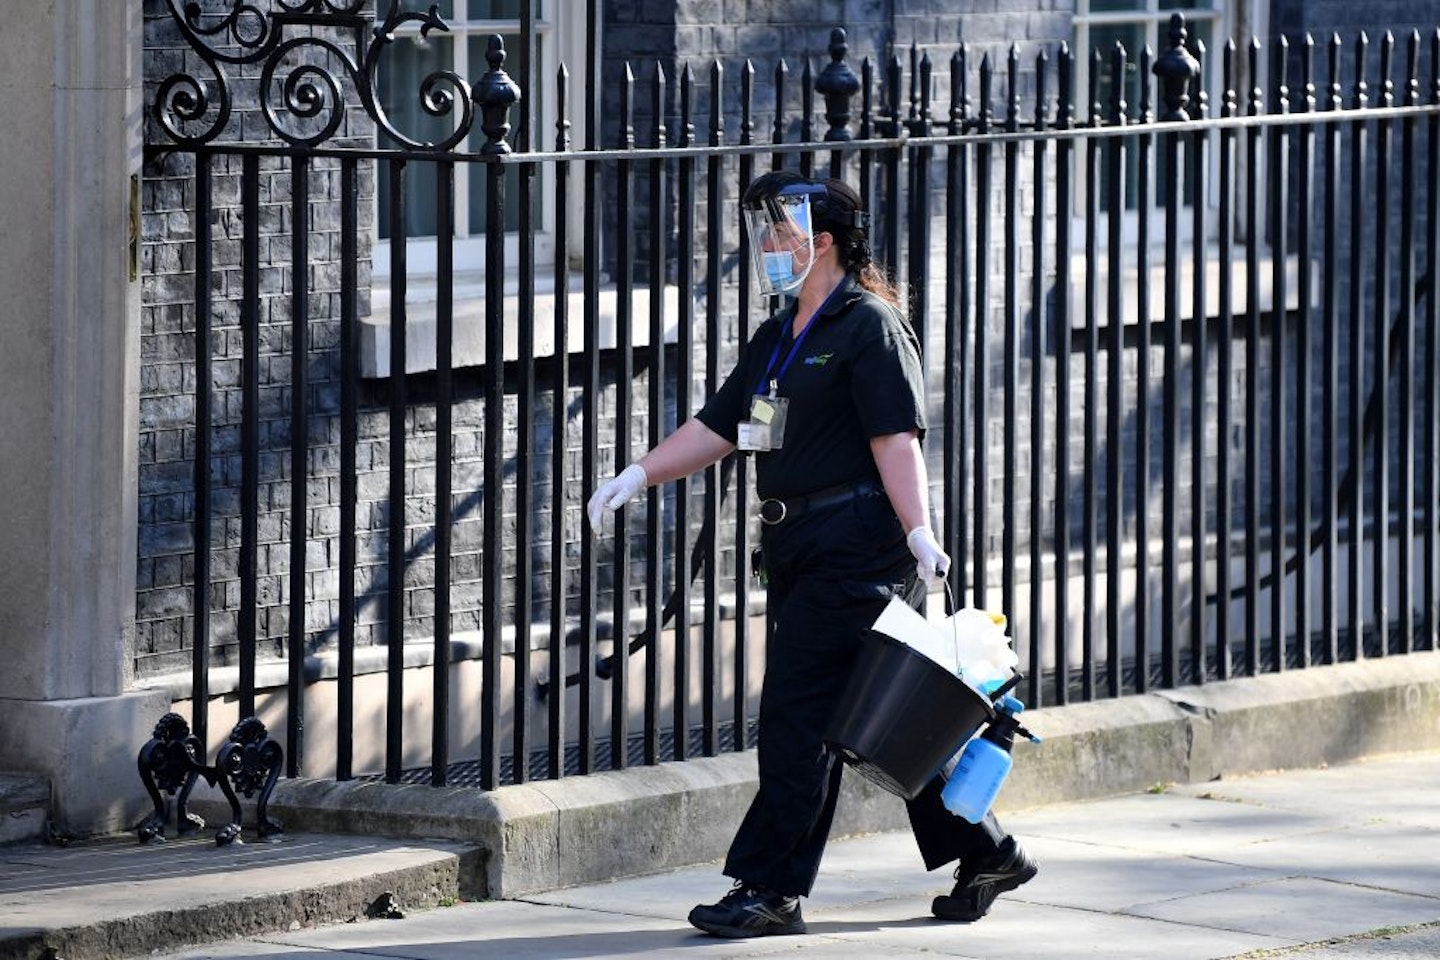 Downing Street Cleaner 